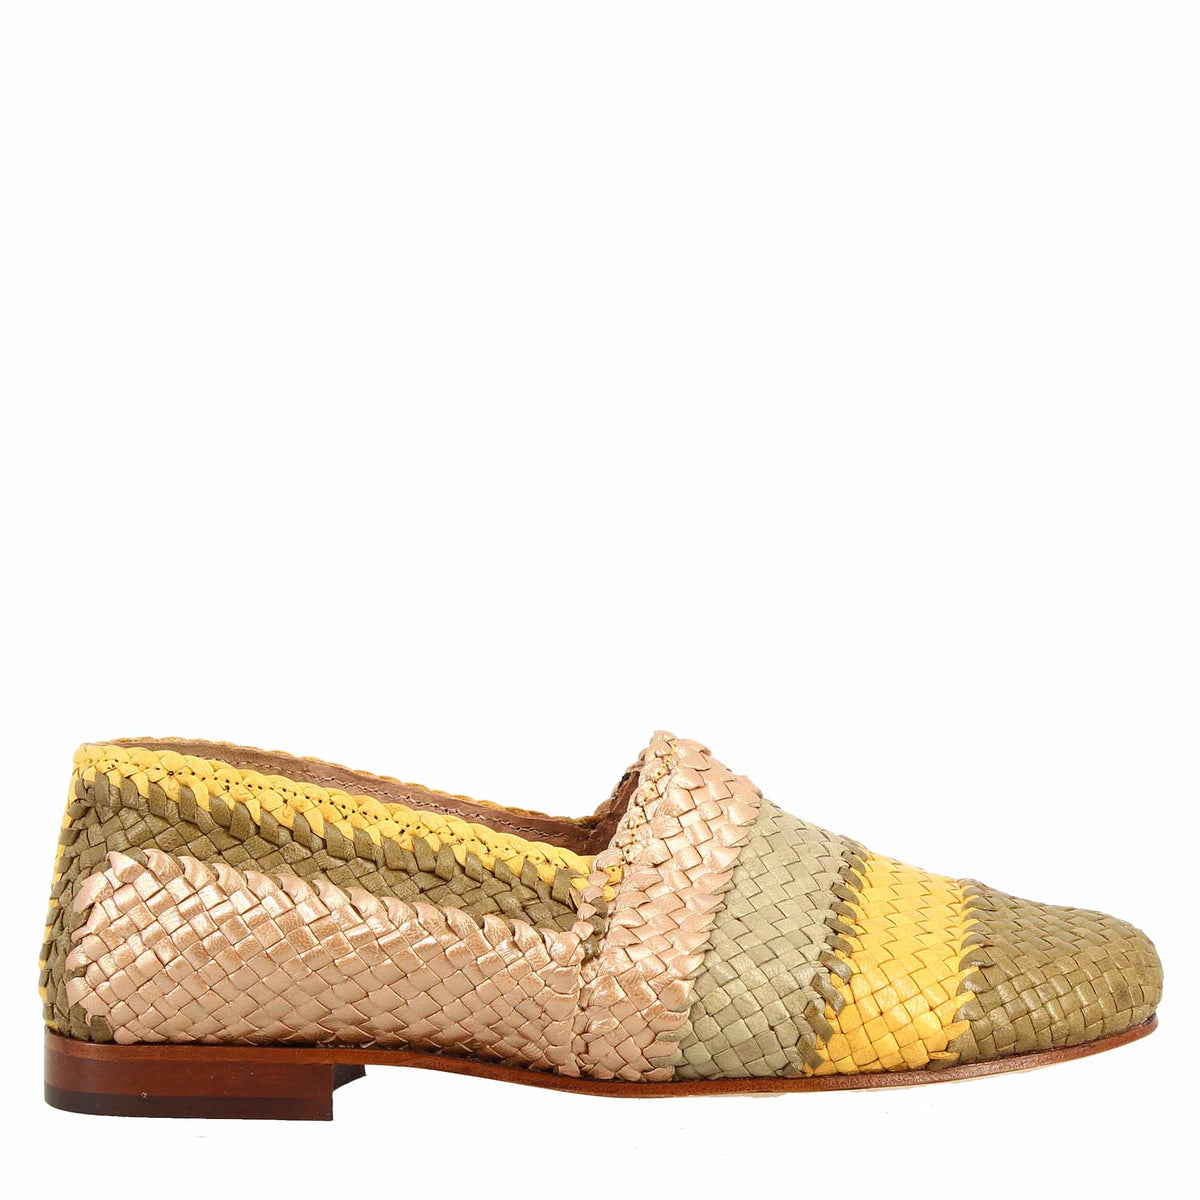 Handmade women's moccasins in green, yellow and beige woven leather 